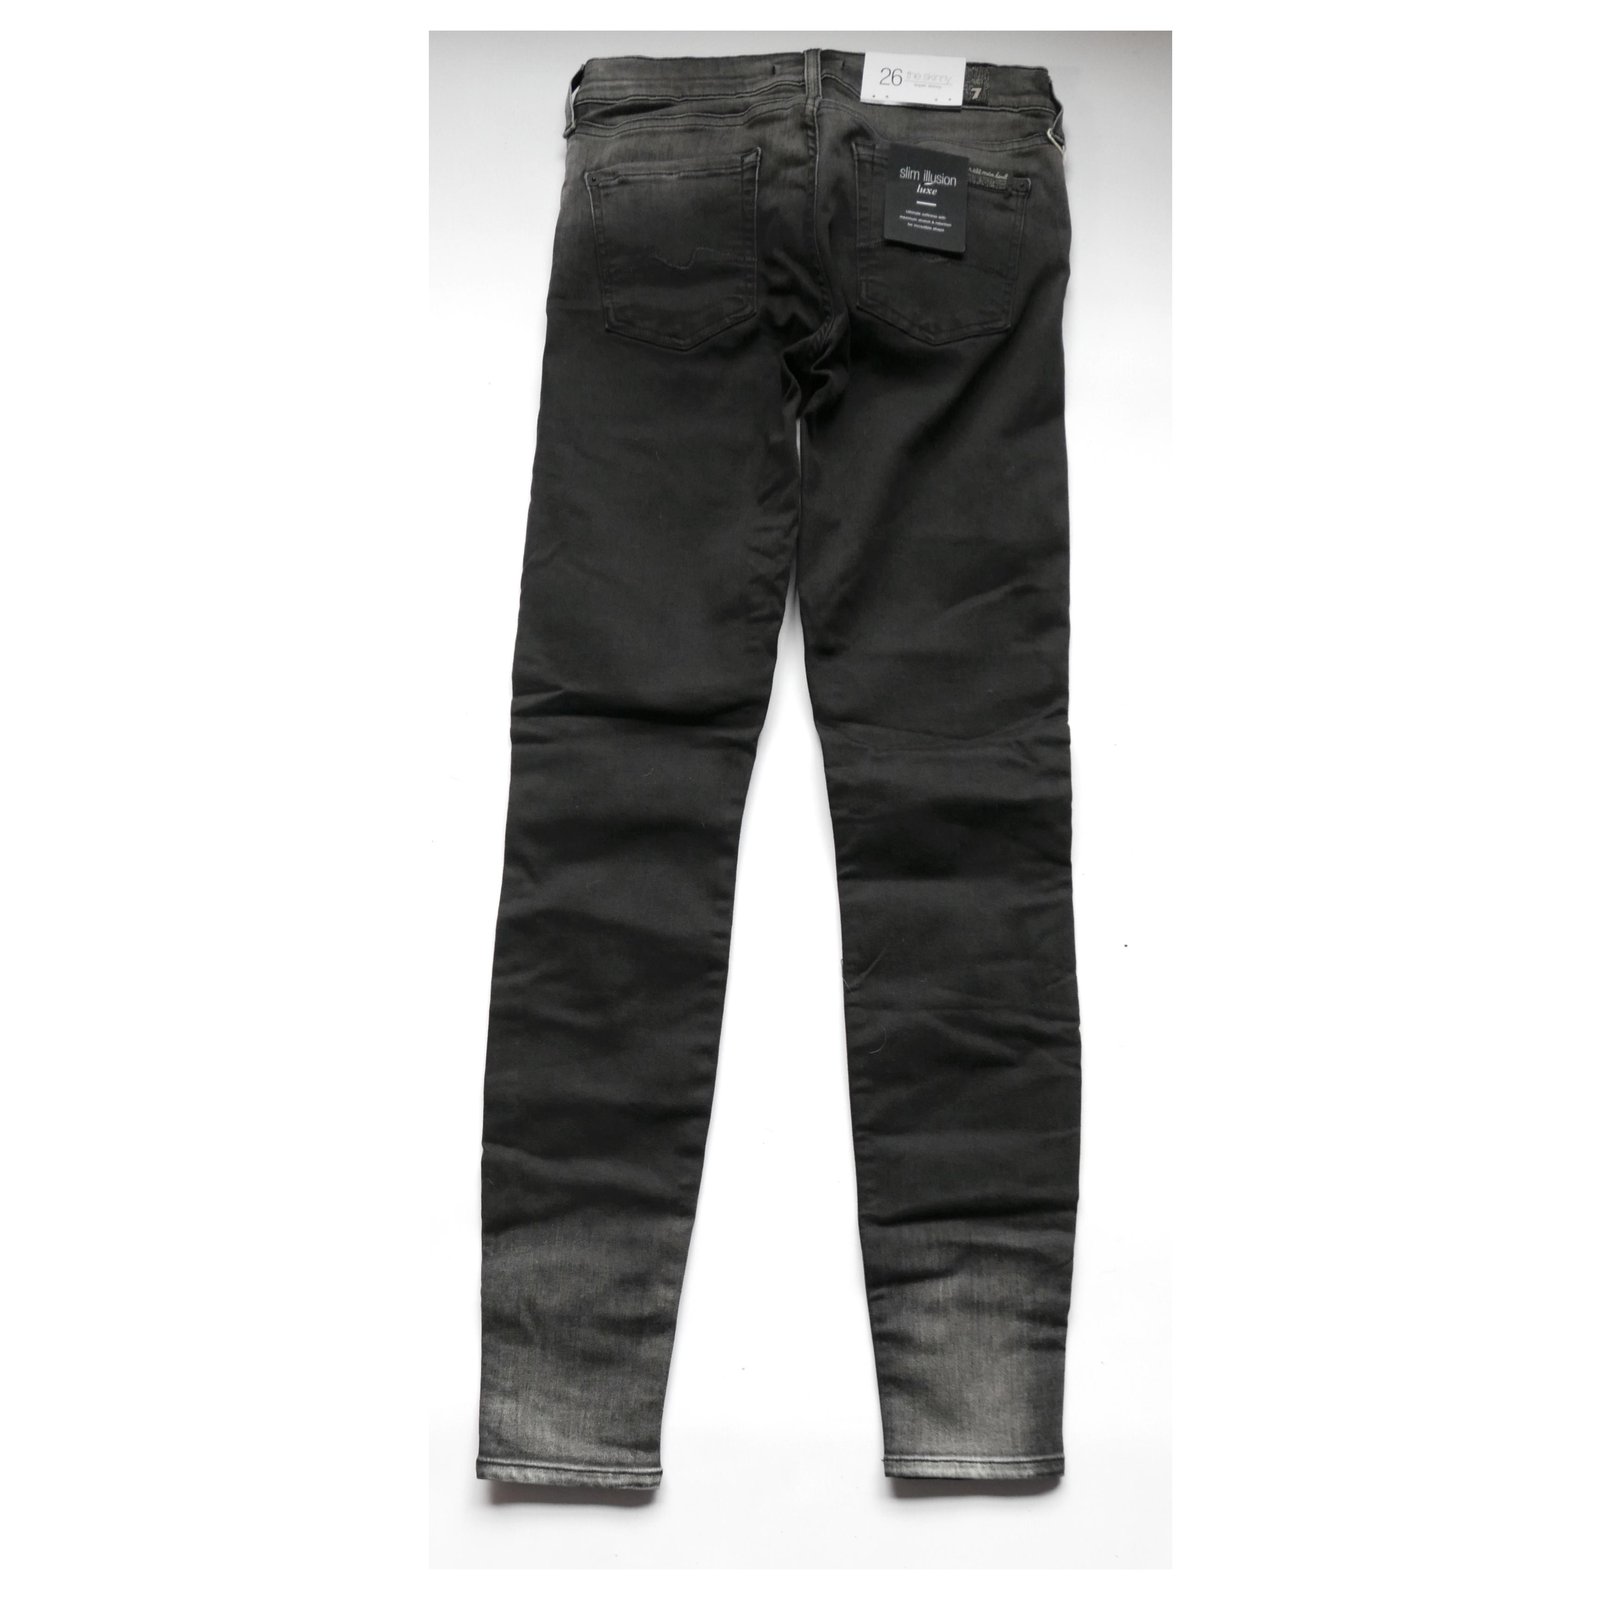 7 For All Mankind black pants